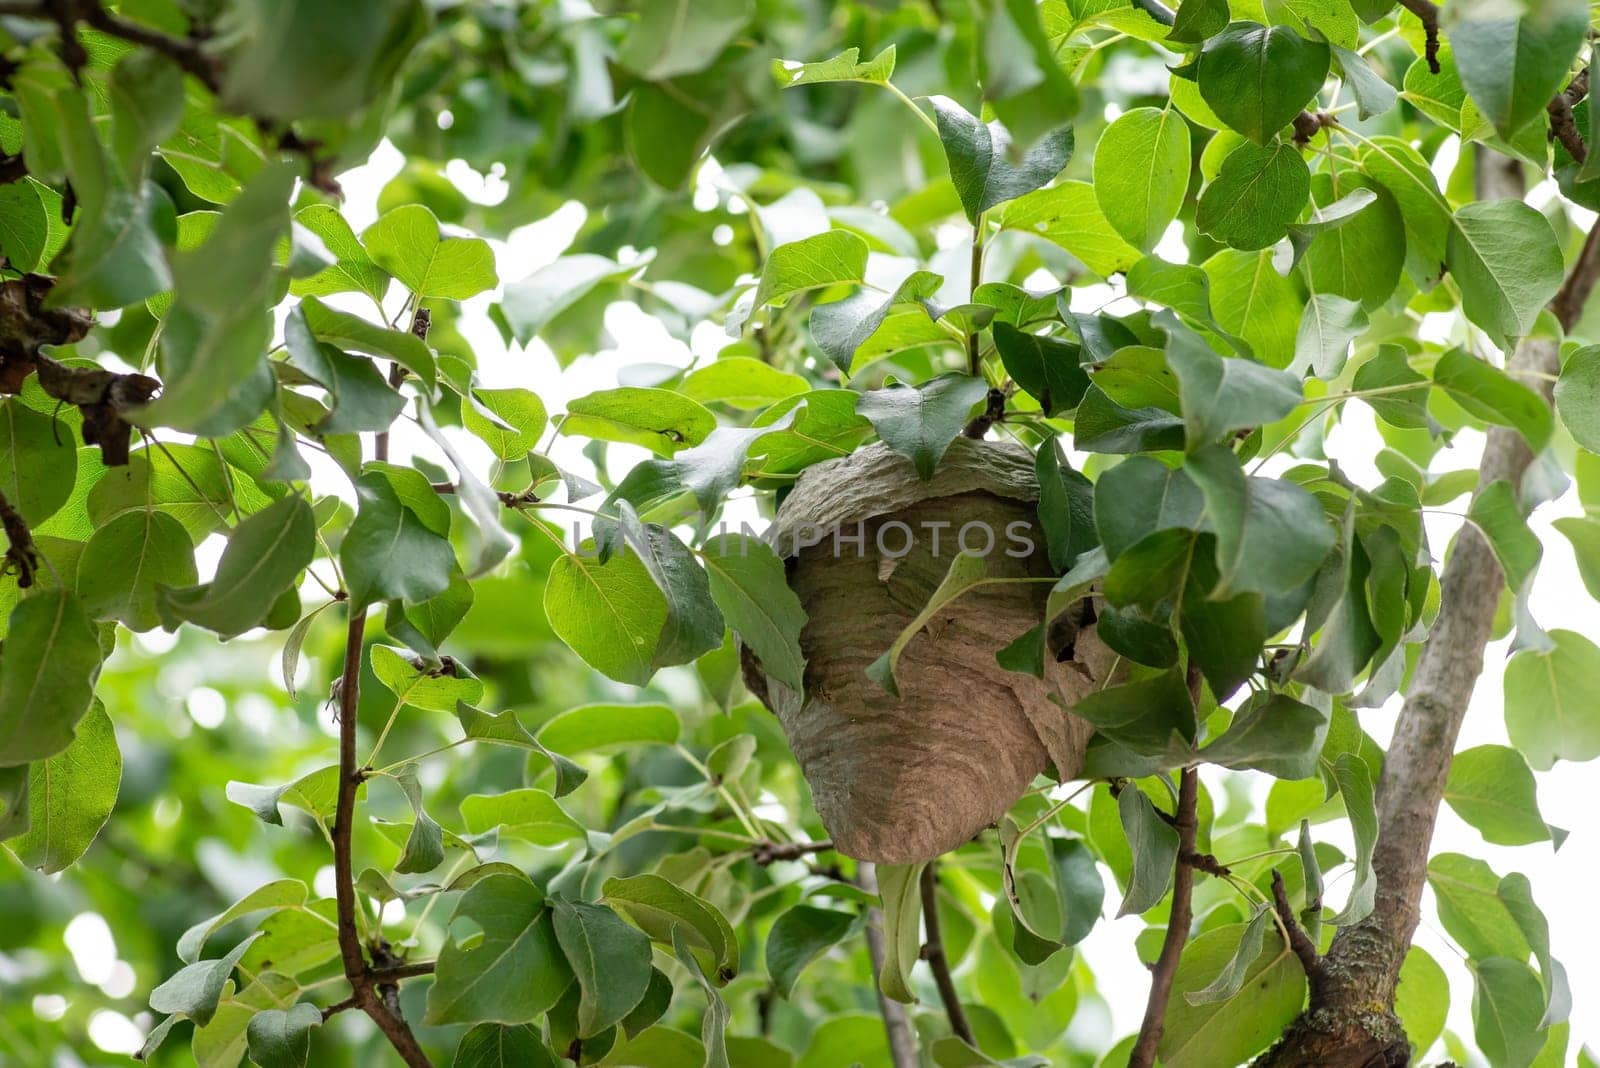 Wasp nest on the tree, one insect near the entrance to the nest by VitaliiPetrushenko